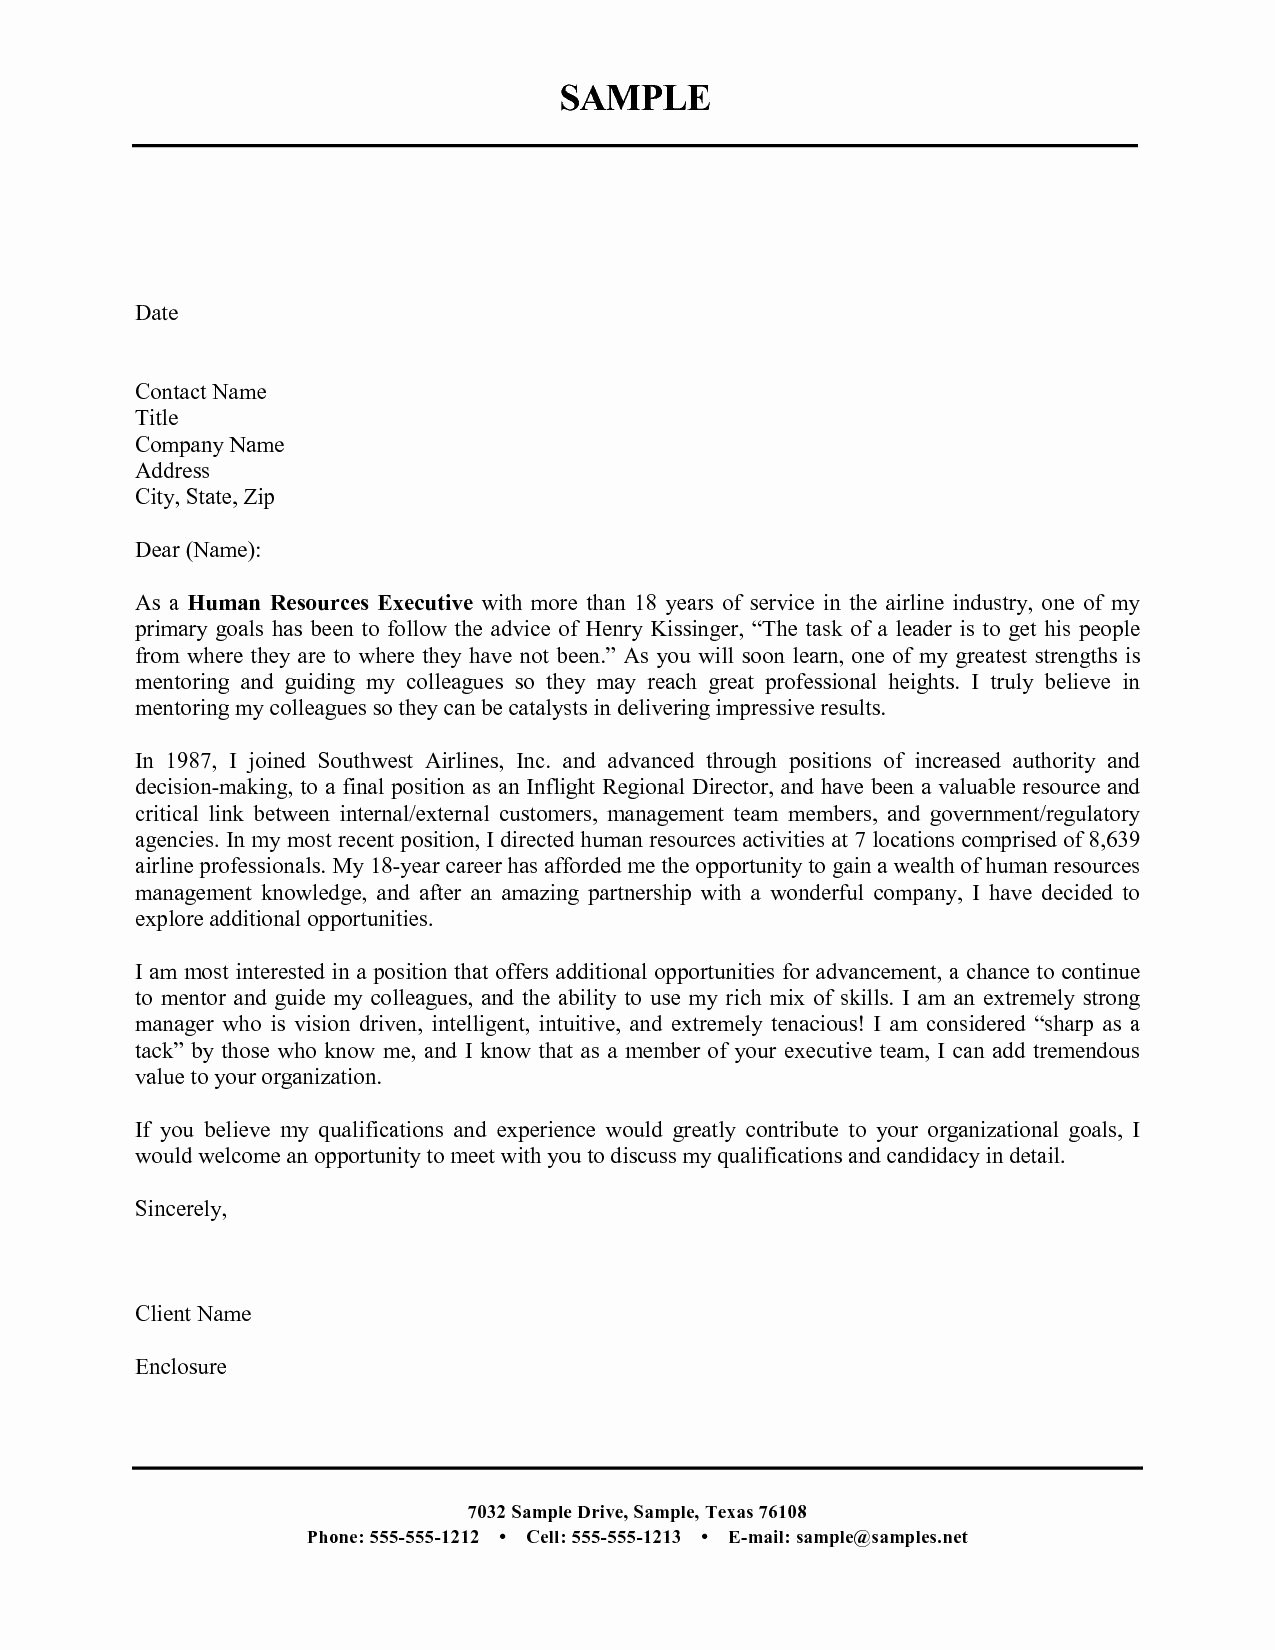 Formal Letter Template Word Lovely Business Letter Template Word 2010